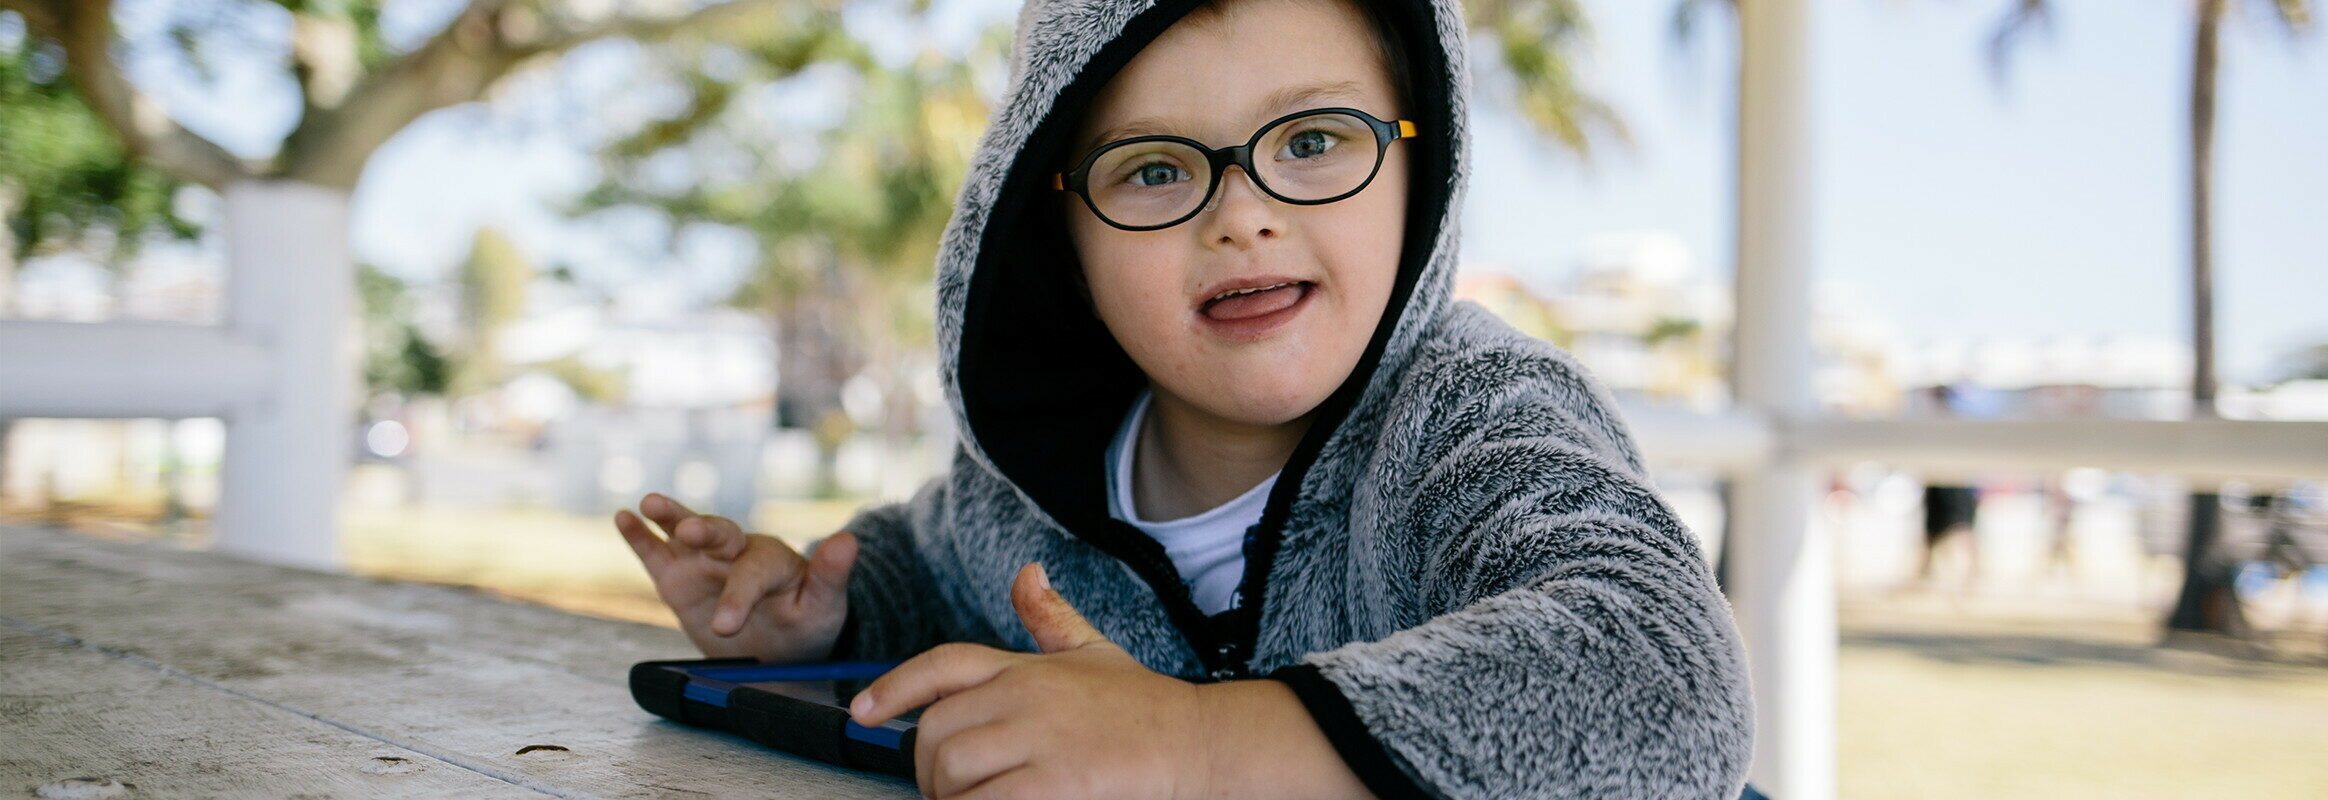 Lucas, a small white boy in a hoodie sitting outside, using an iPad and smiling